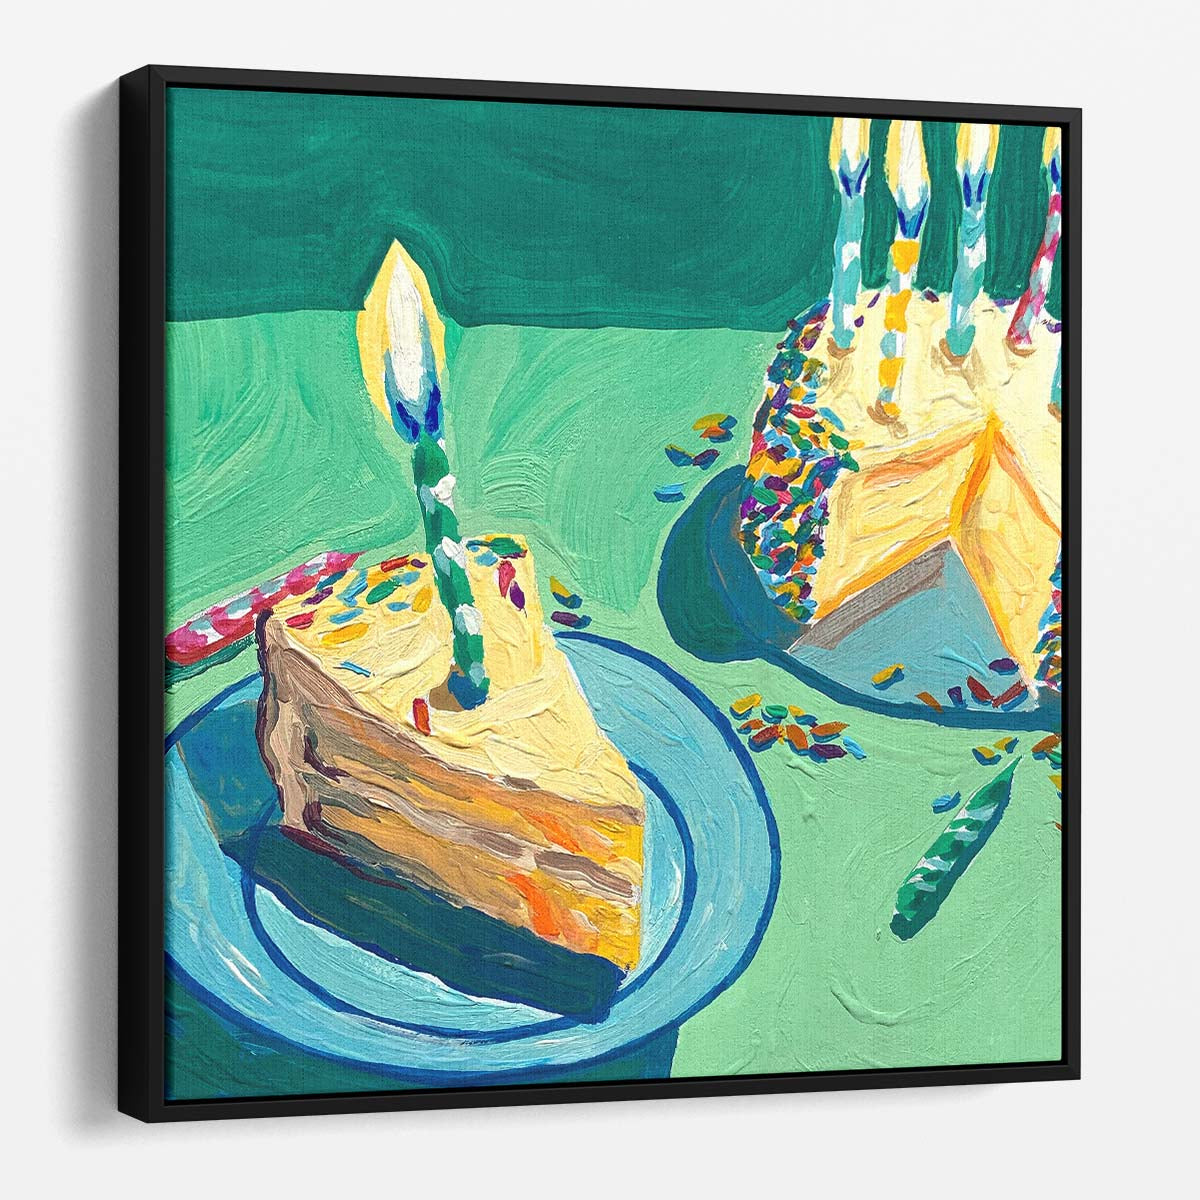 Colorful Birthday Cake Illustration with Candle Accents Wall Art by Luxuriance Designs. Made in USA.